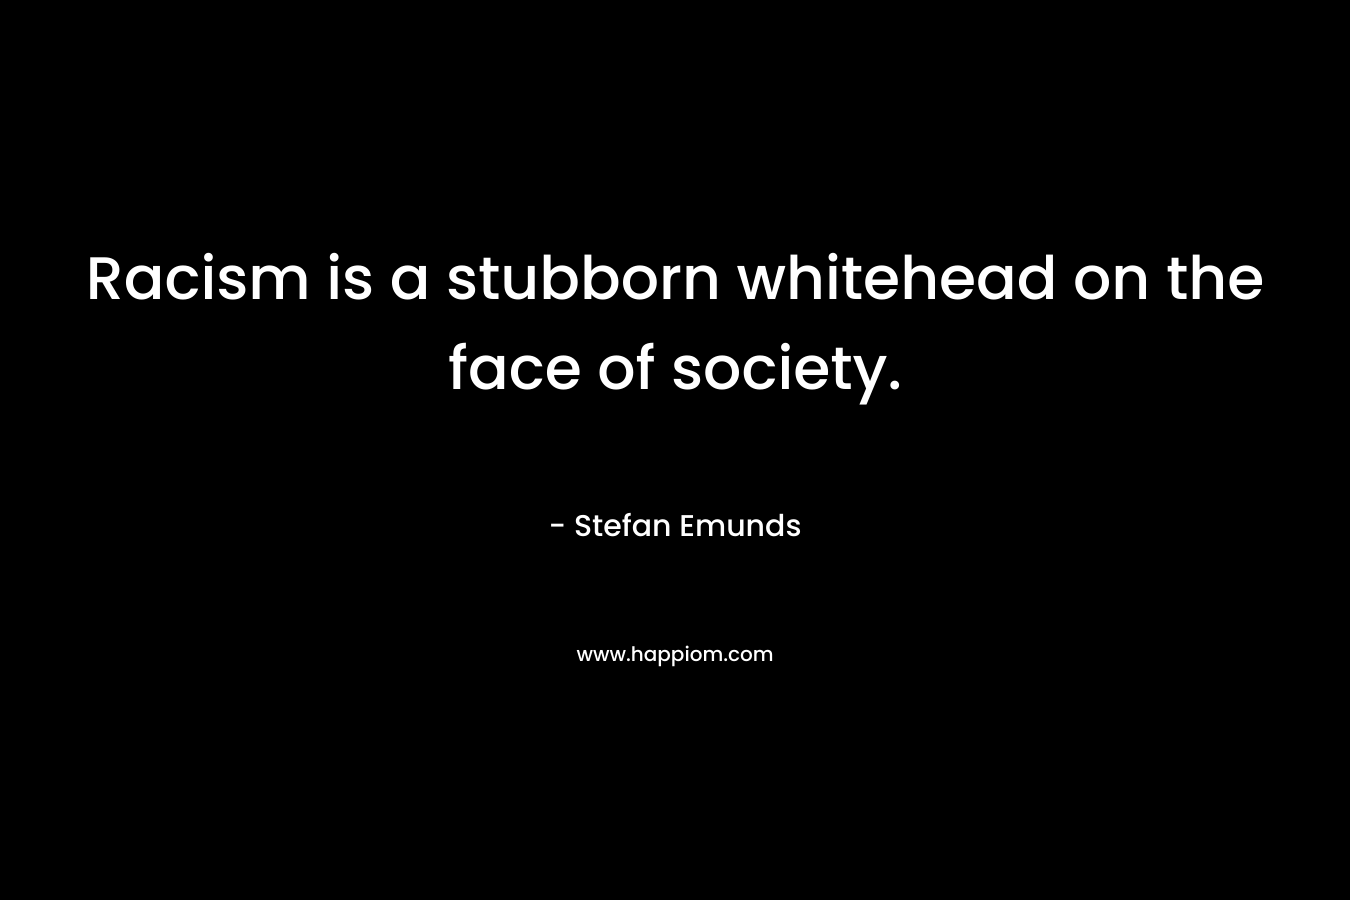 Racism is a stubborn whitehead on the face of society.